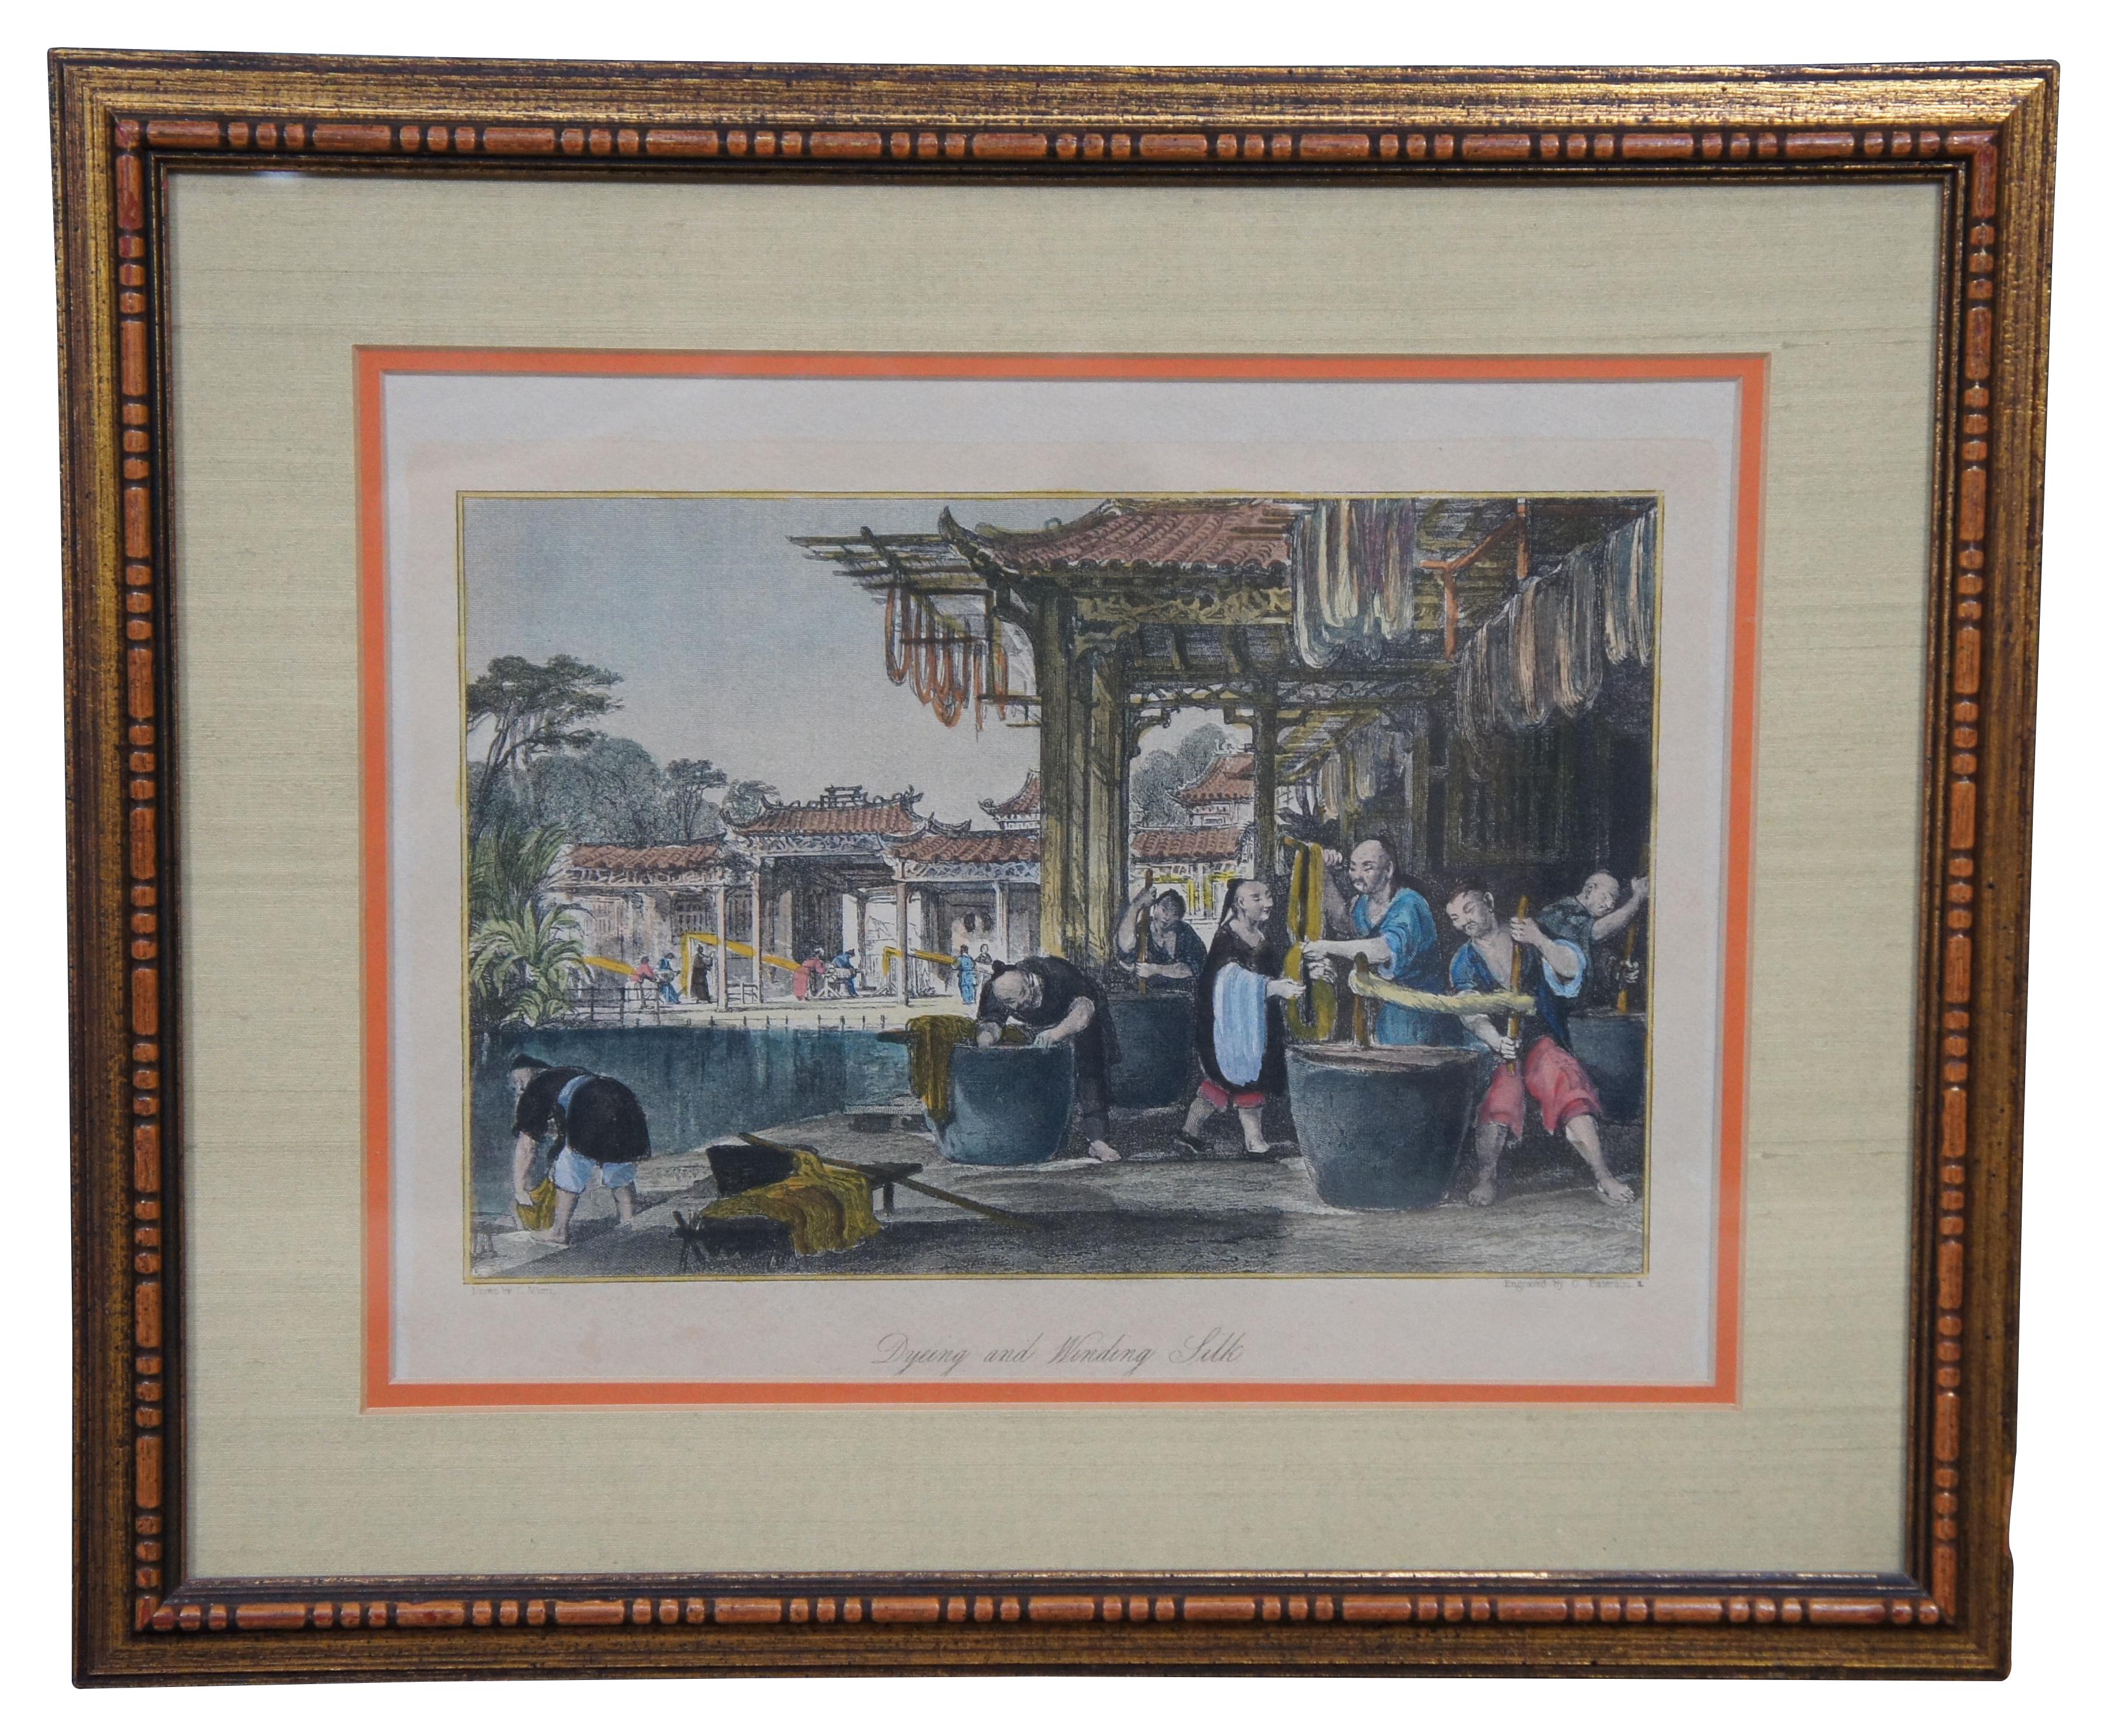 Chinoiserie 2 19th Century Colored Engravings Vender Shop Winding Silk Canton 